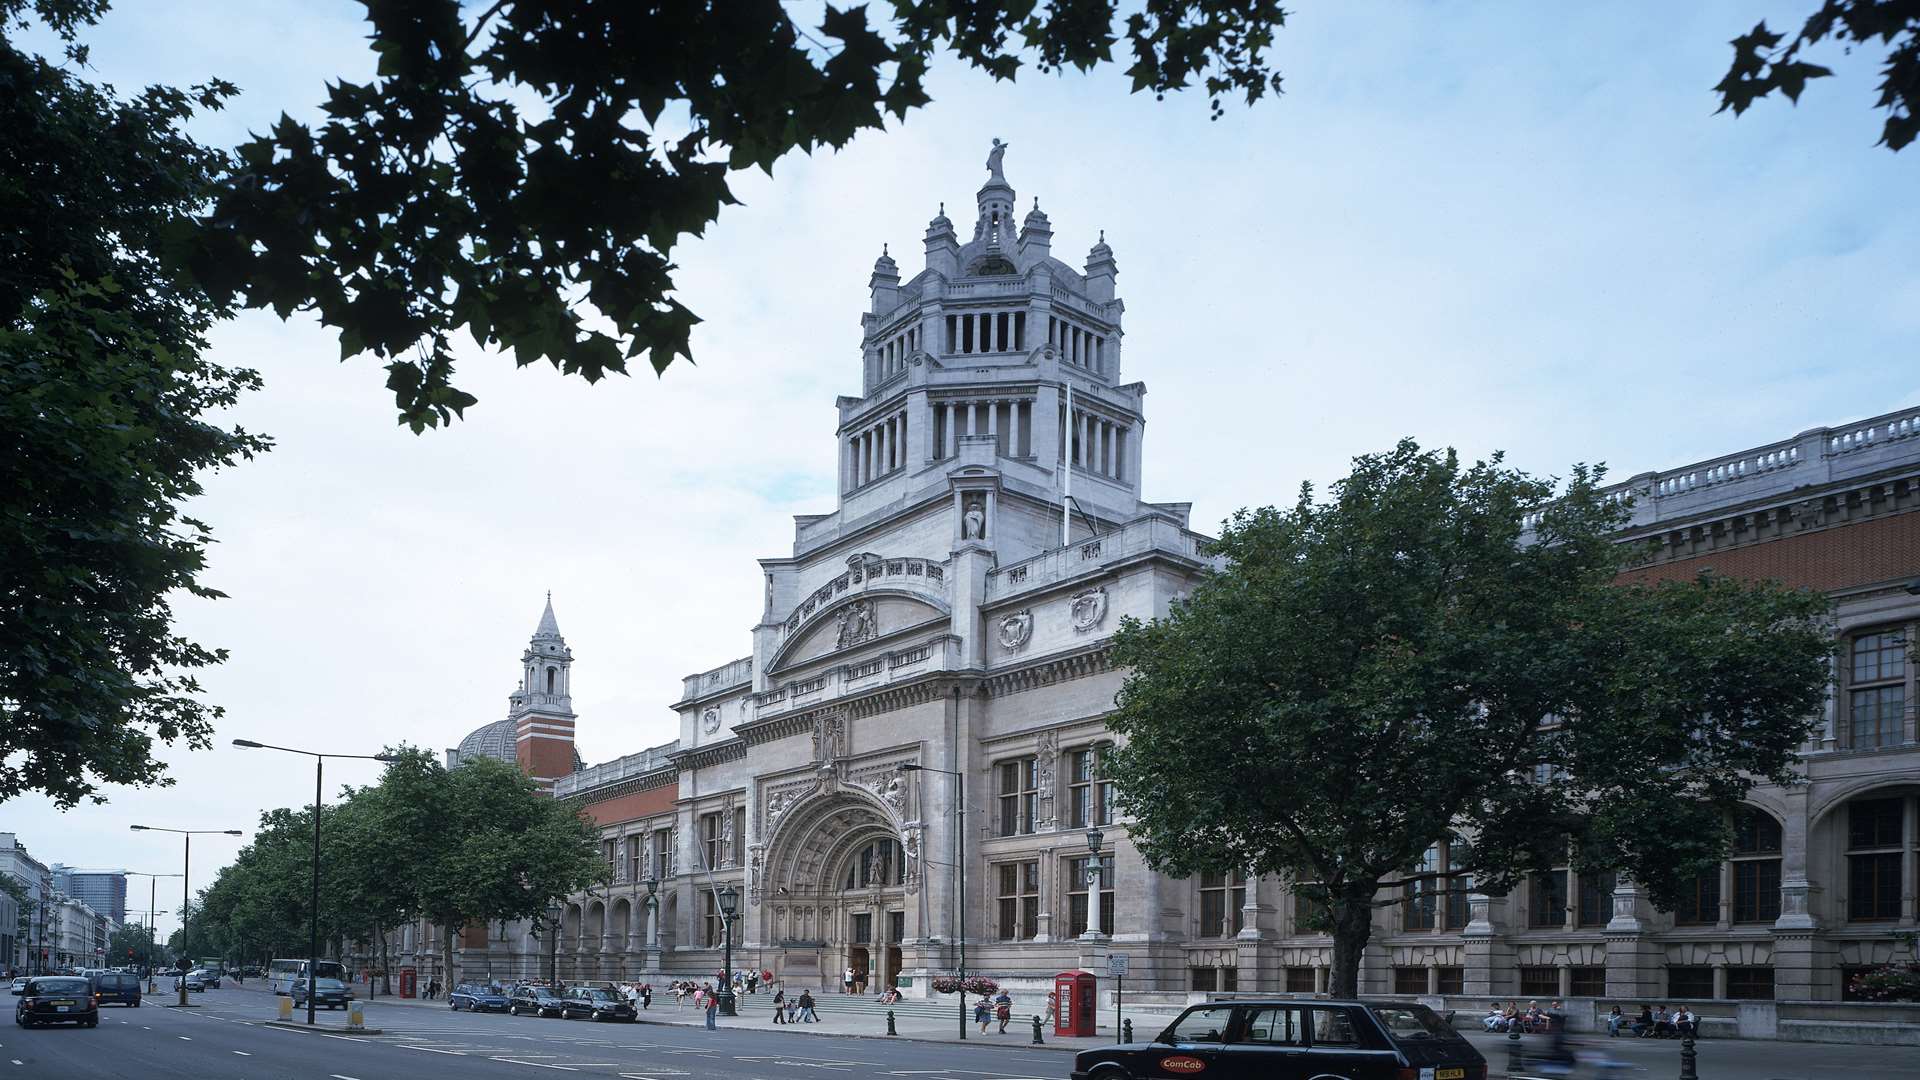 The V&A is the world's largest museum of decorative arts and design, housing a permanent collection of over 4.5 million objects.